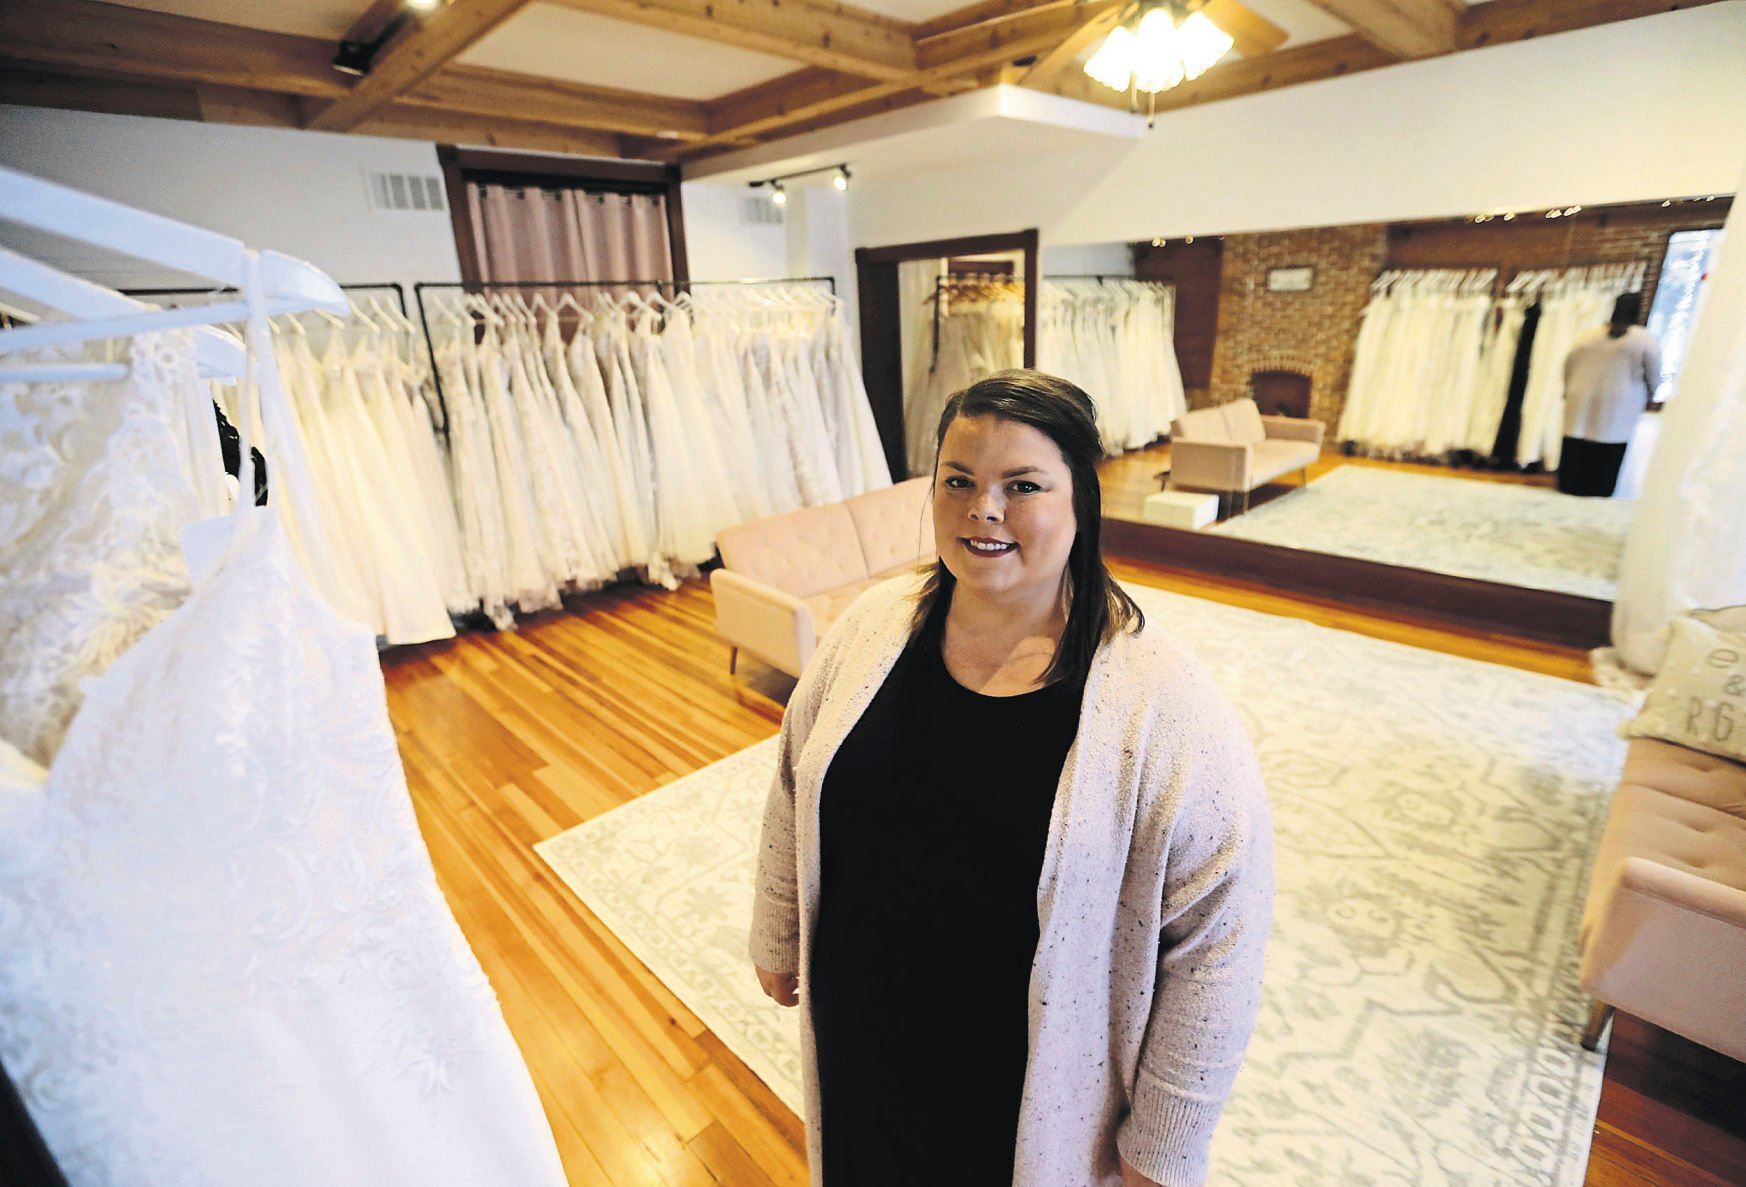 Shelby Duggan owns Vintage Chic Bridal Boutique in Dubuque. Photo taken on Thursday, Dec. 9, 2021.    PHOTO CREDIT: JESSICA REILLY